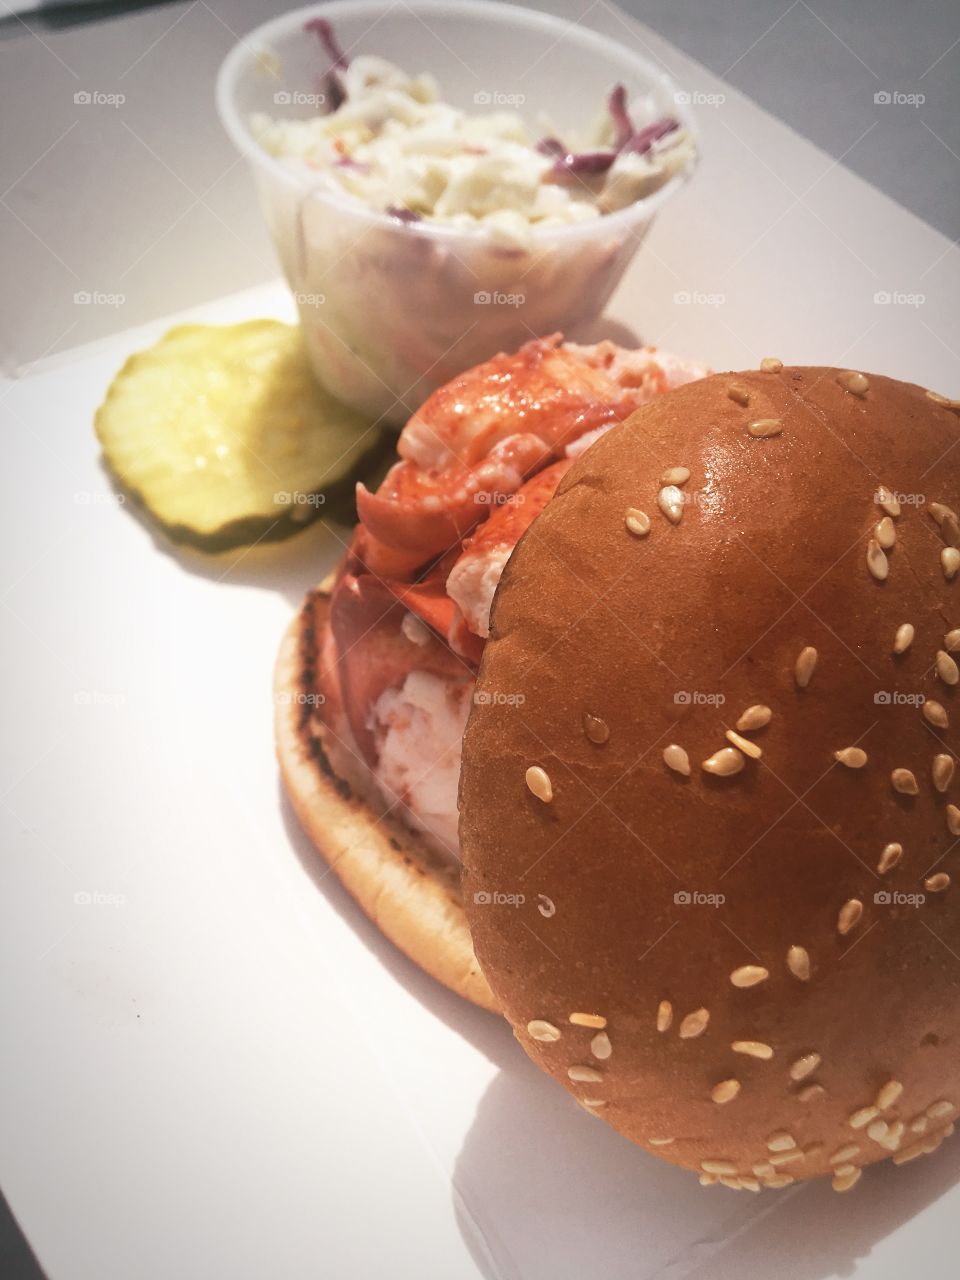 A classic New England lobster roll complete with a pickle and coleslaw 